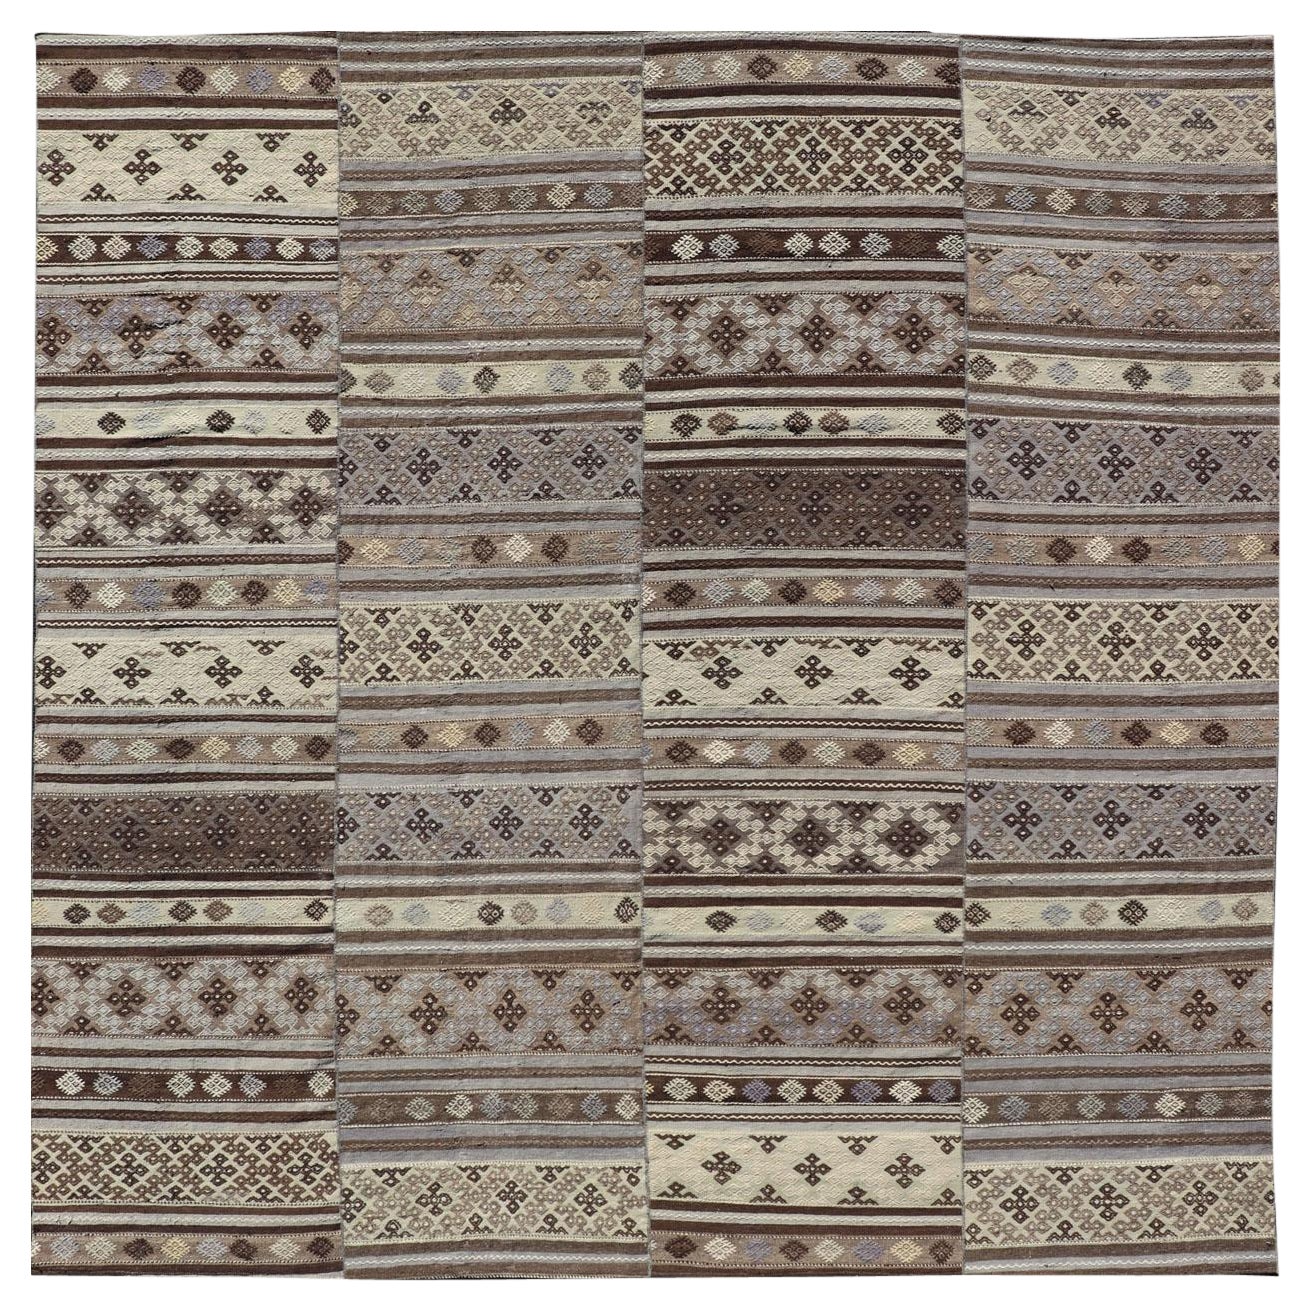 Large Vintage Flat-Woven Turkish Paneled Kilim Rug in Wool with Stripe Design For Sale